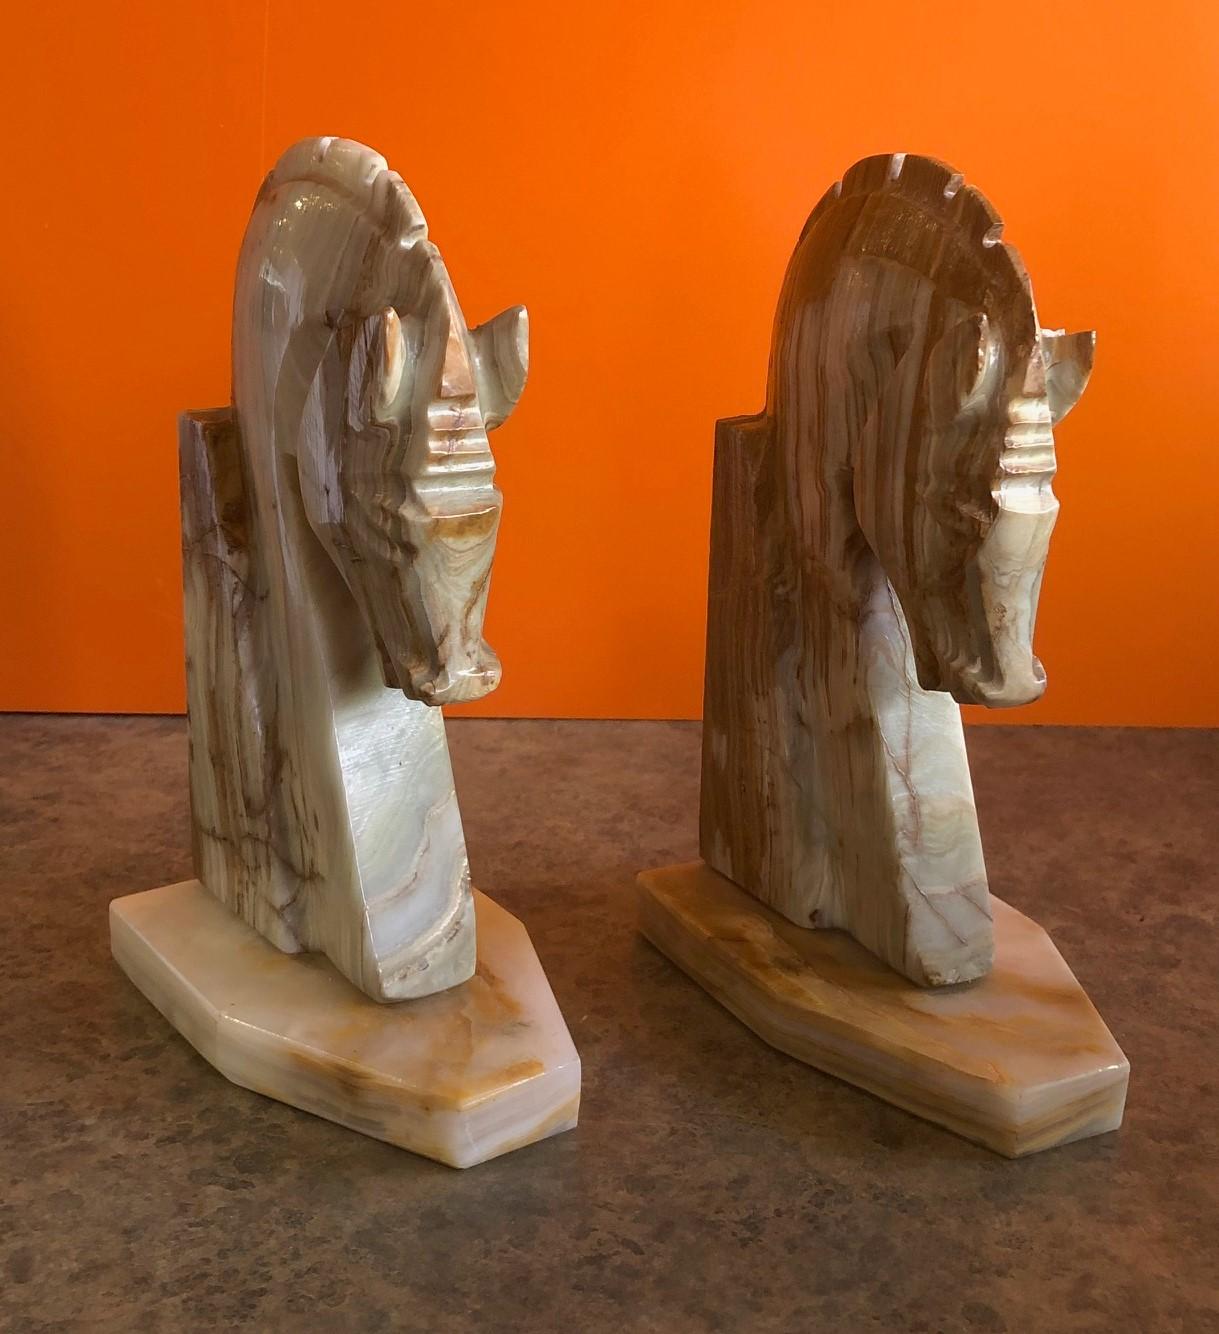 Very stylish pair of midcentury marble horse head bookends, circa 1970s. The bookends are heavy and solid and well crafted. They would make a great addition to any office or den.